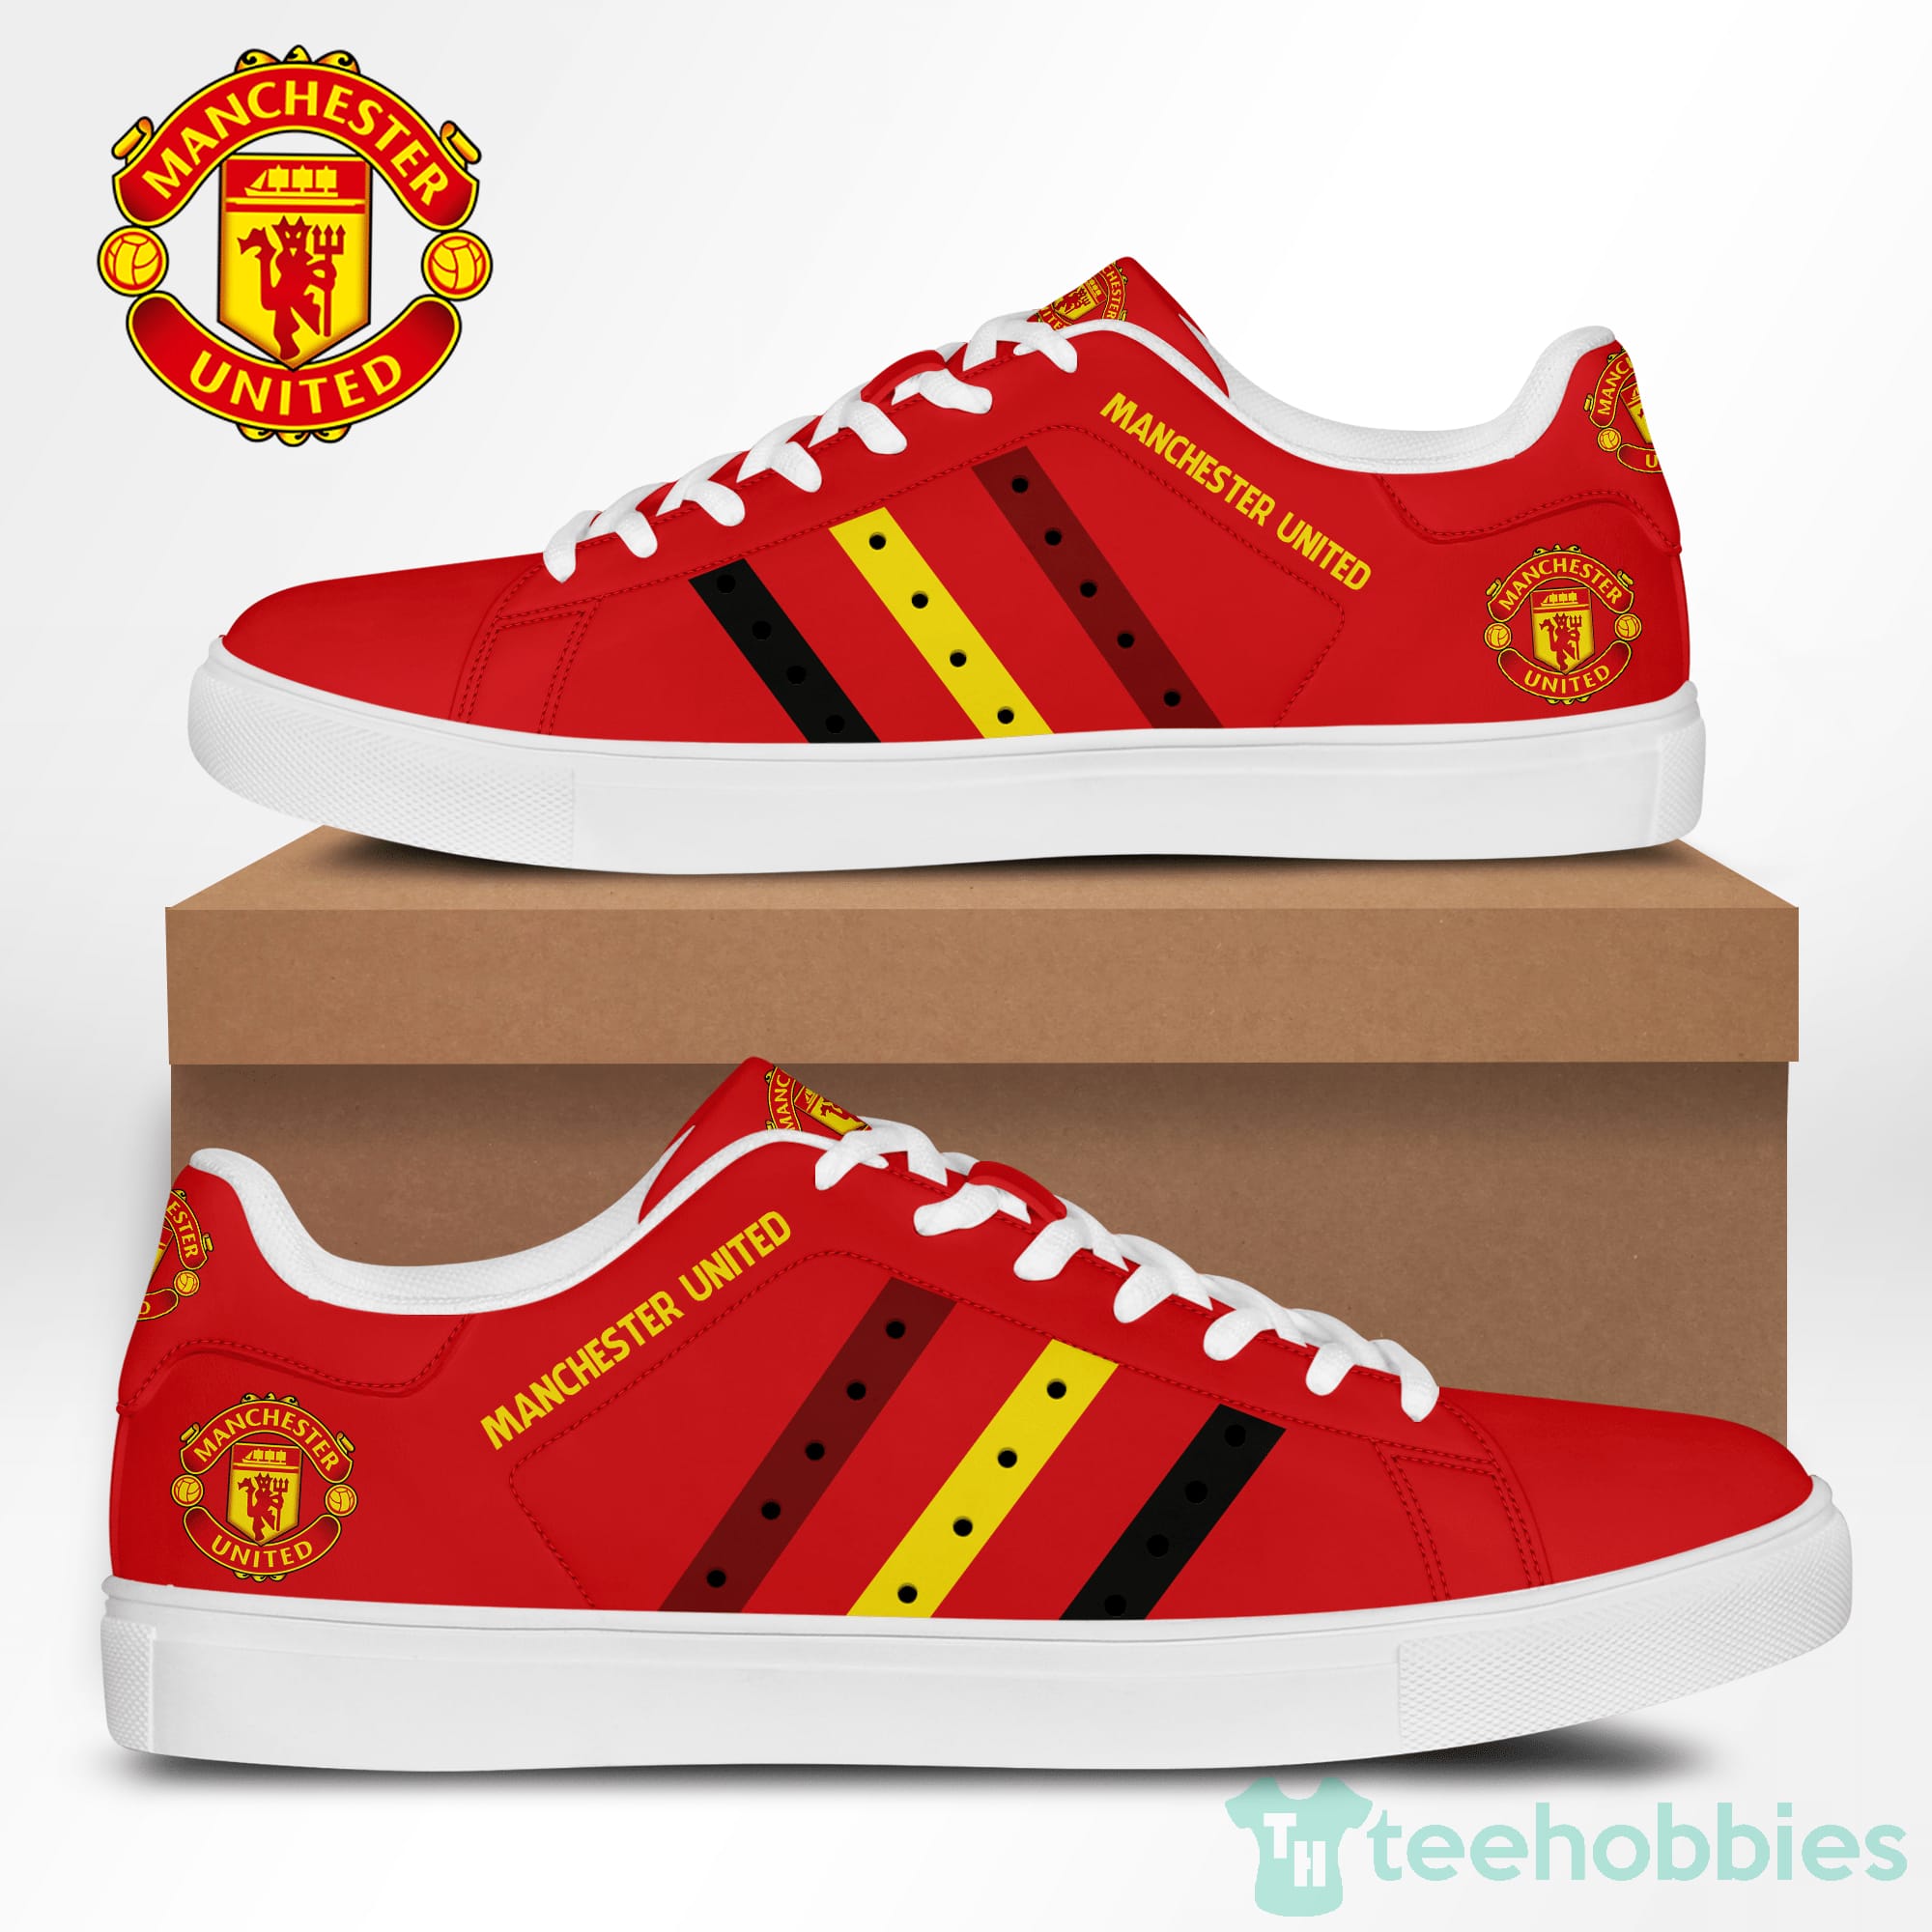 Manchester United Fc For Fans Low Top Skate Shoes